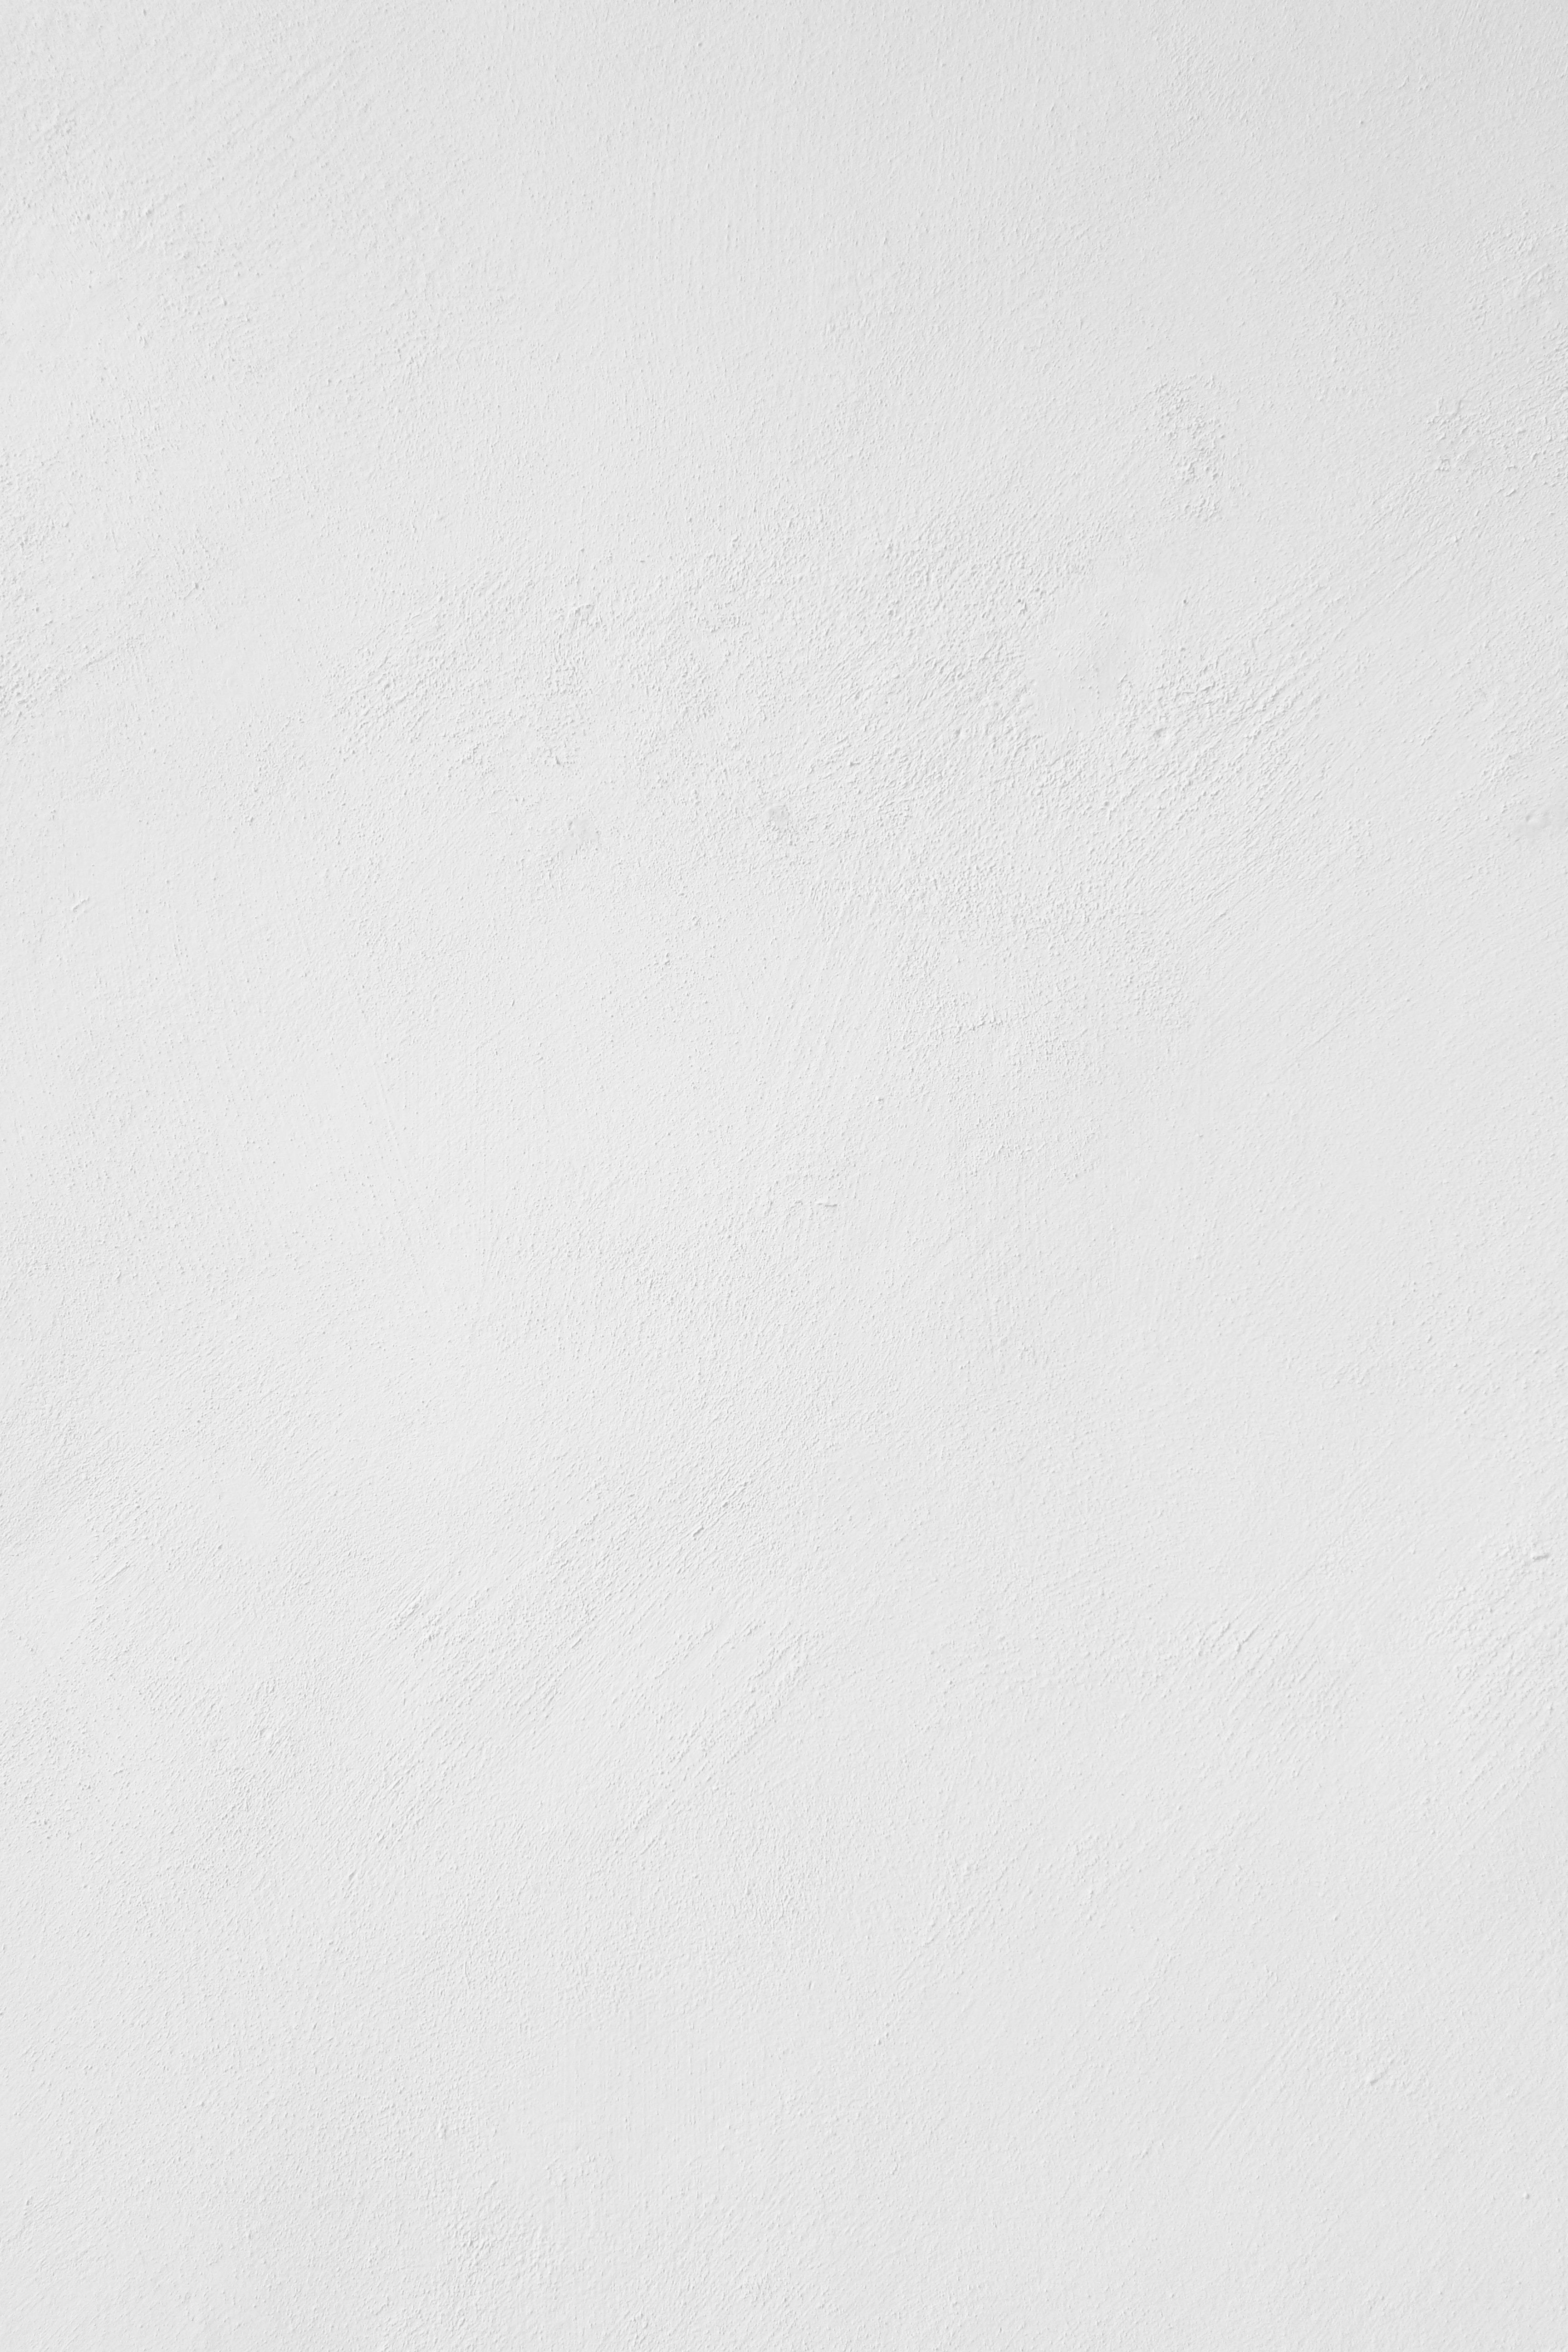 84666 download wallpaper monochromatic, plain, textures, texture, wall, grey screensavers and pictures for free